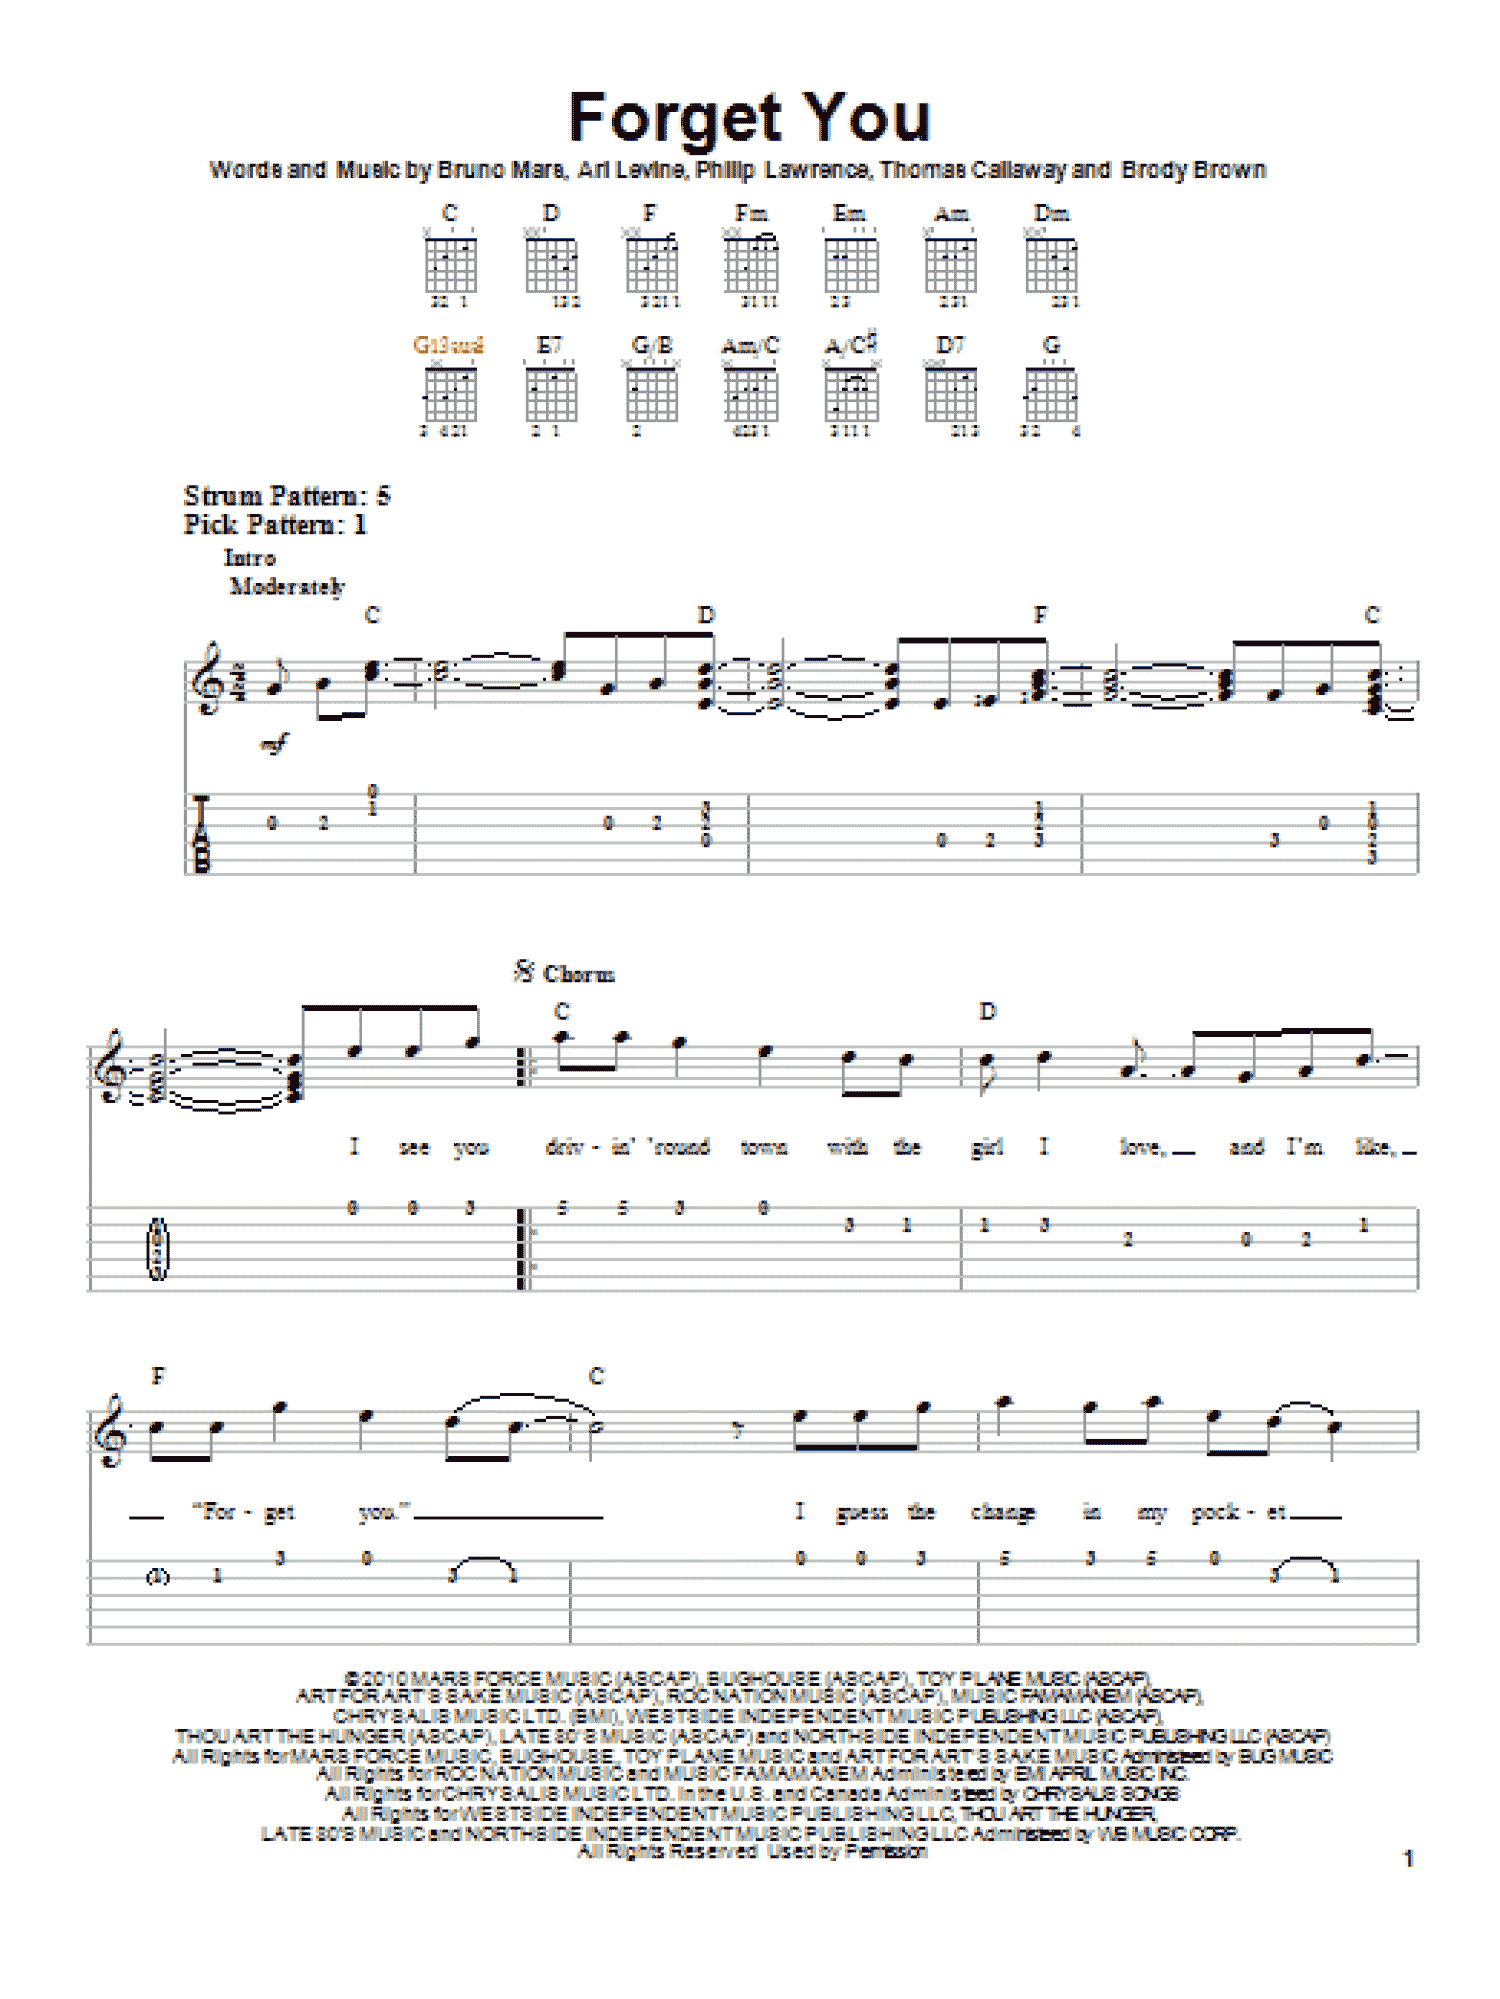 F**k You (Forget You) (Easy Guitar Tab)